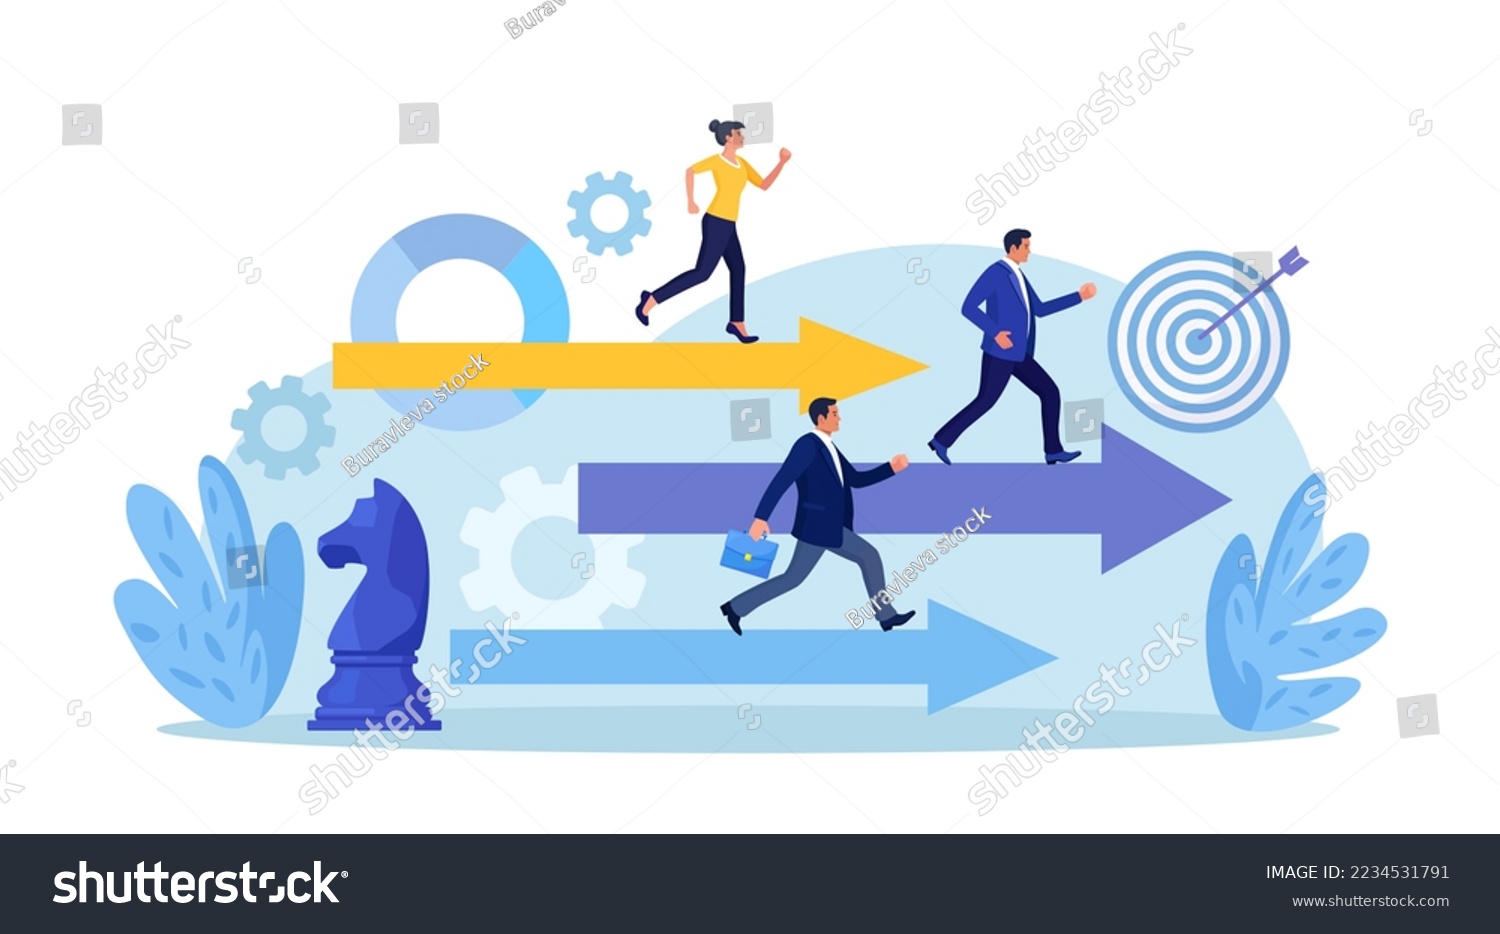 SVG of Business people compete running on arrows. Business competition. Contest or rivalry against competitors to increase sales. Career success or achievement. Skill or effort to succeed in work, motivation svg